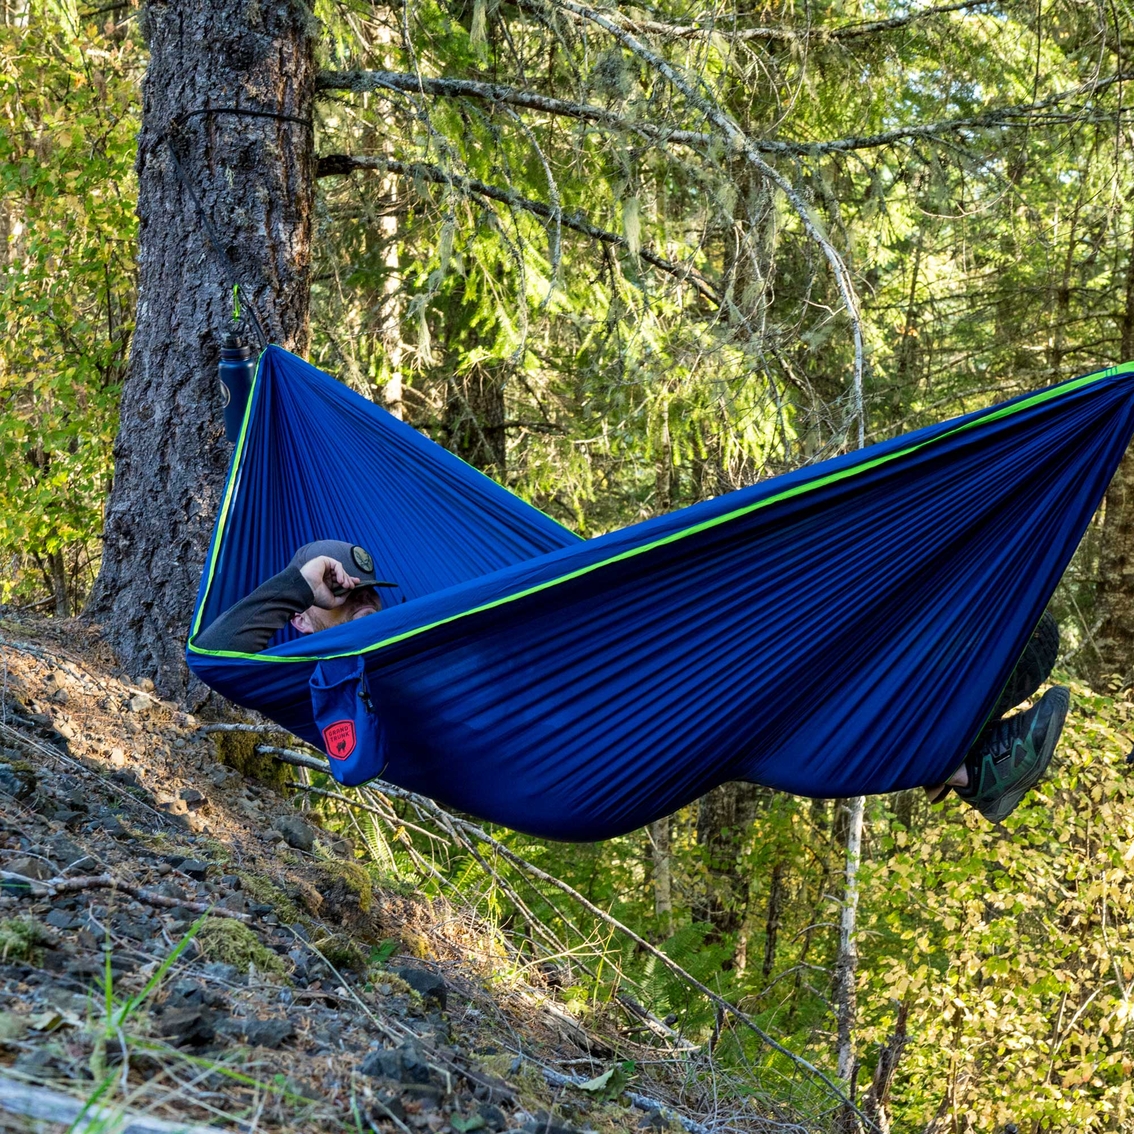 Grand Trunk TrunkTech Double Hammock - Image 6 of 7